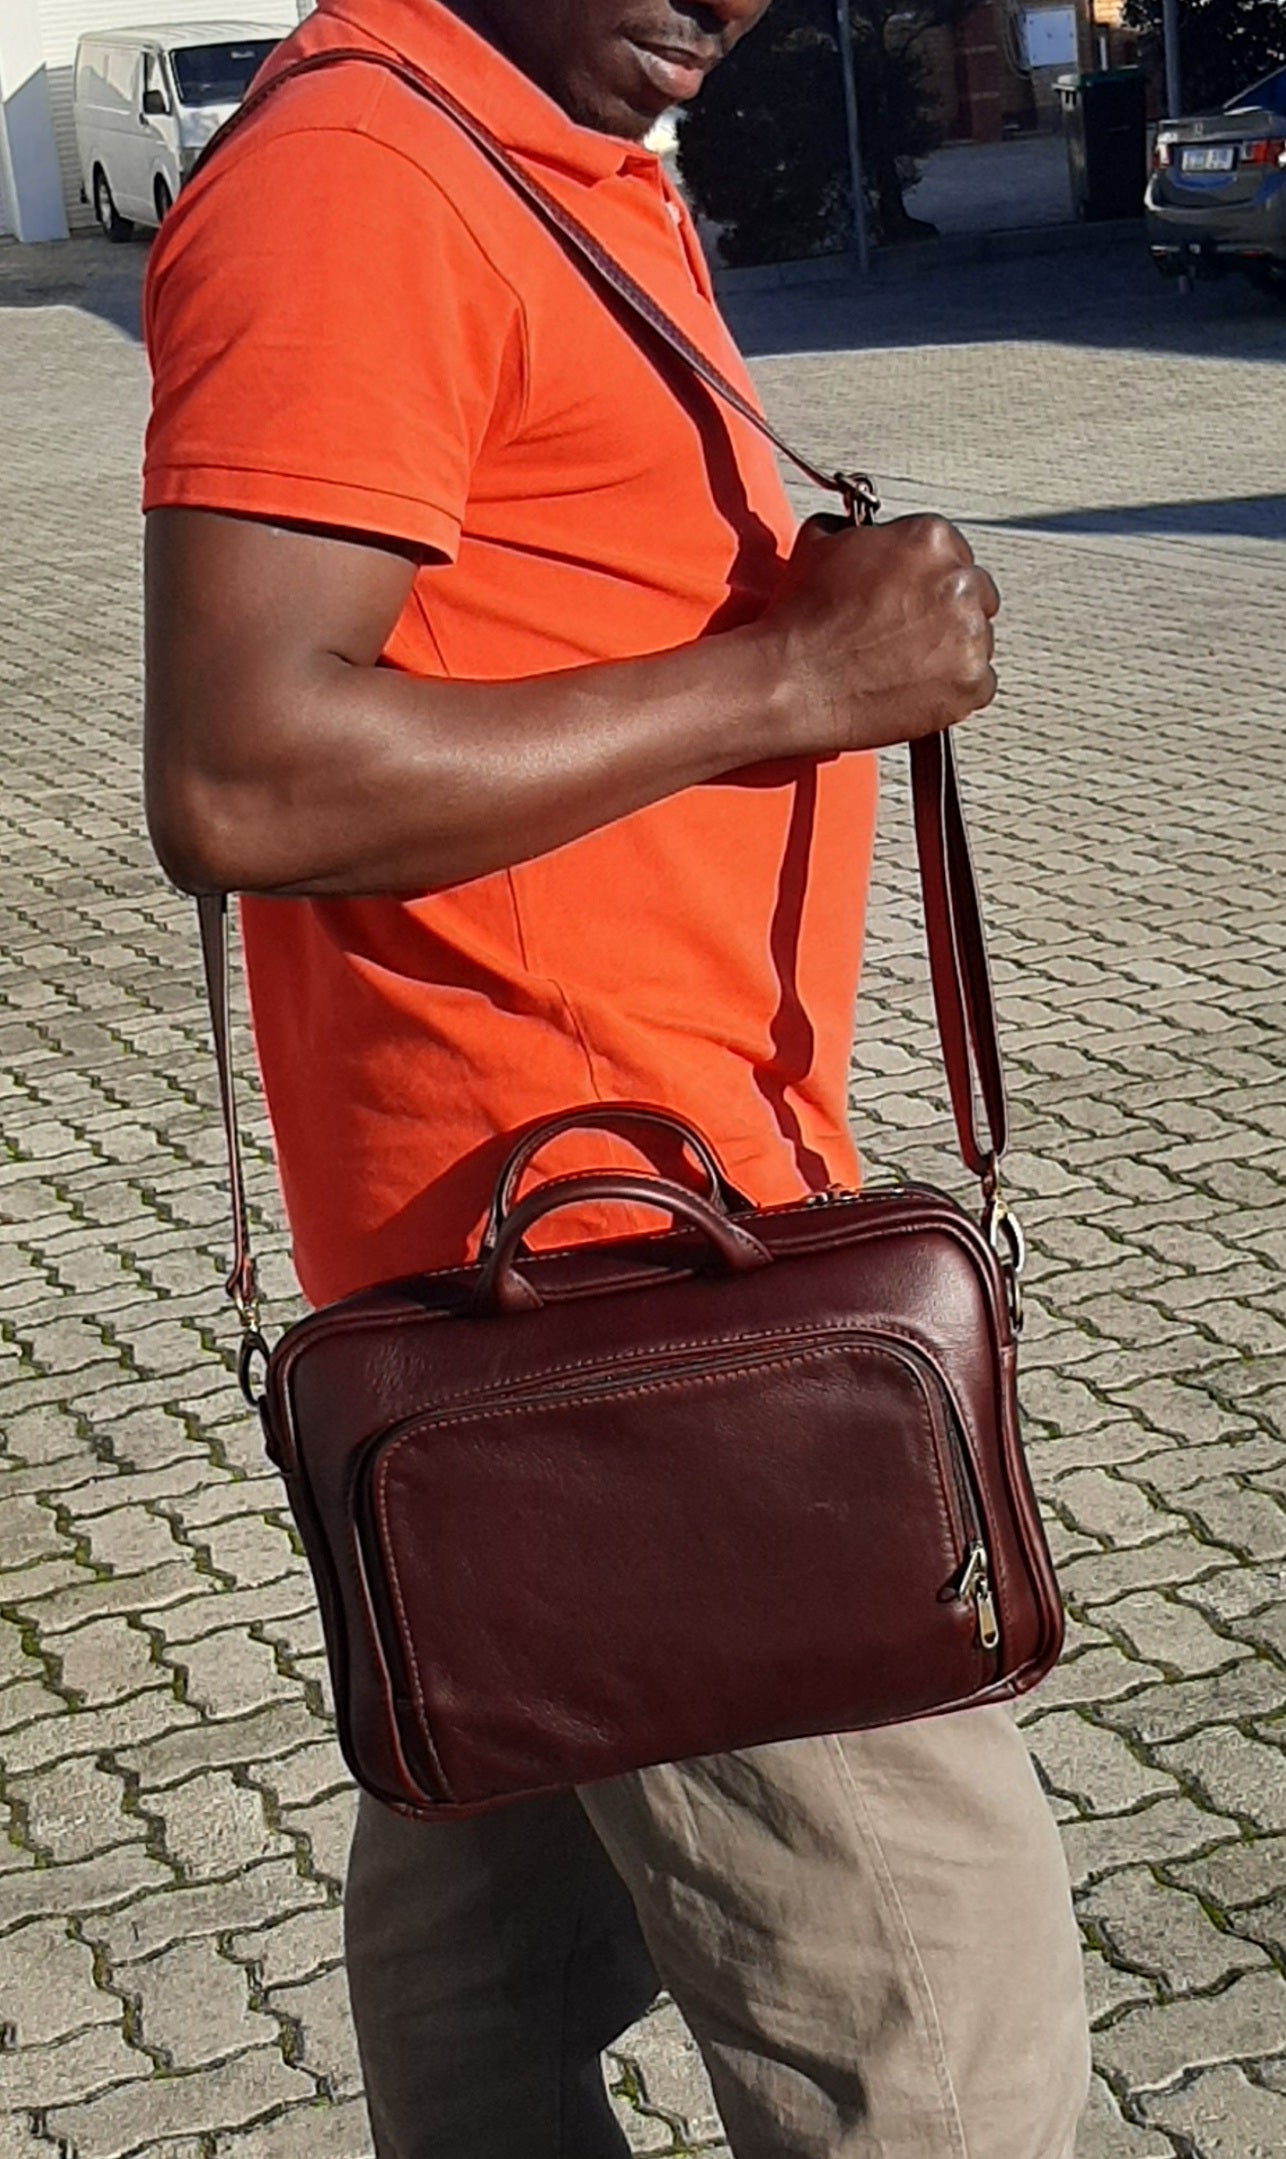 A man carrying beautiful genuine leather A4 laptop bags 12 inche outside Cape Masai Leather shop